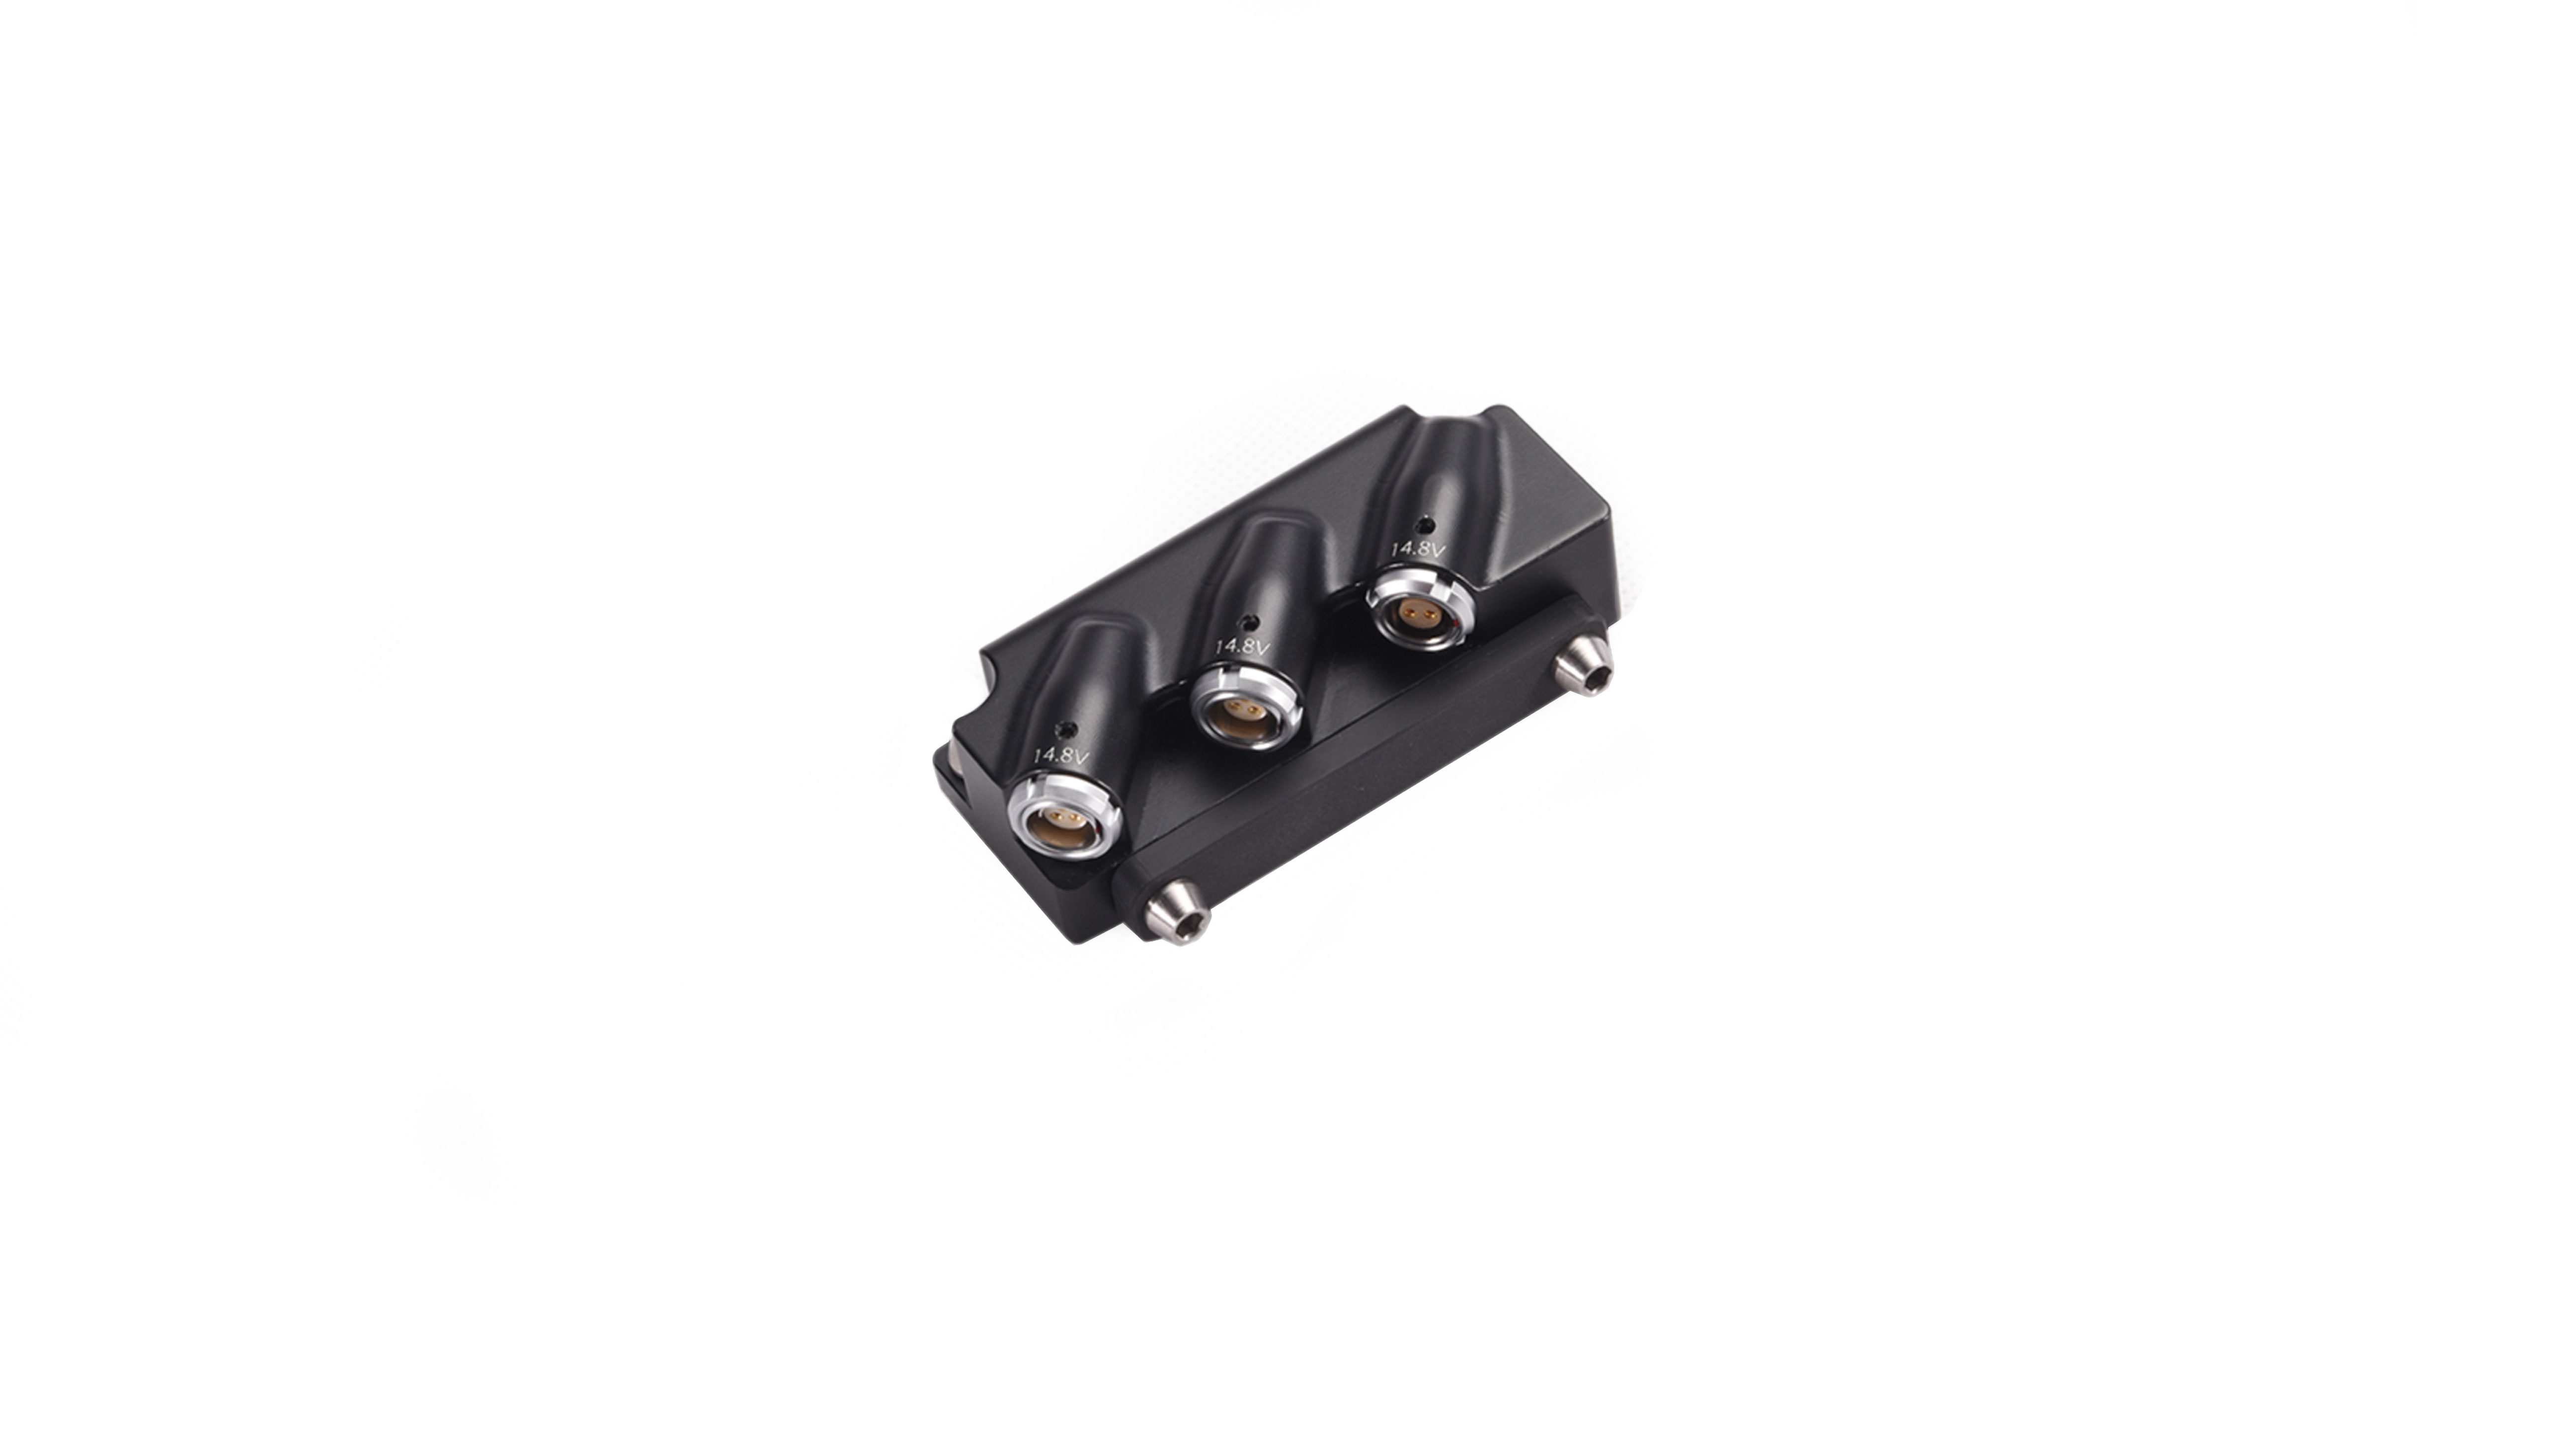 Top Plate Power Connection Module for Arri Alexa Mini Camera Cage (Discontinued)